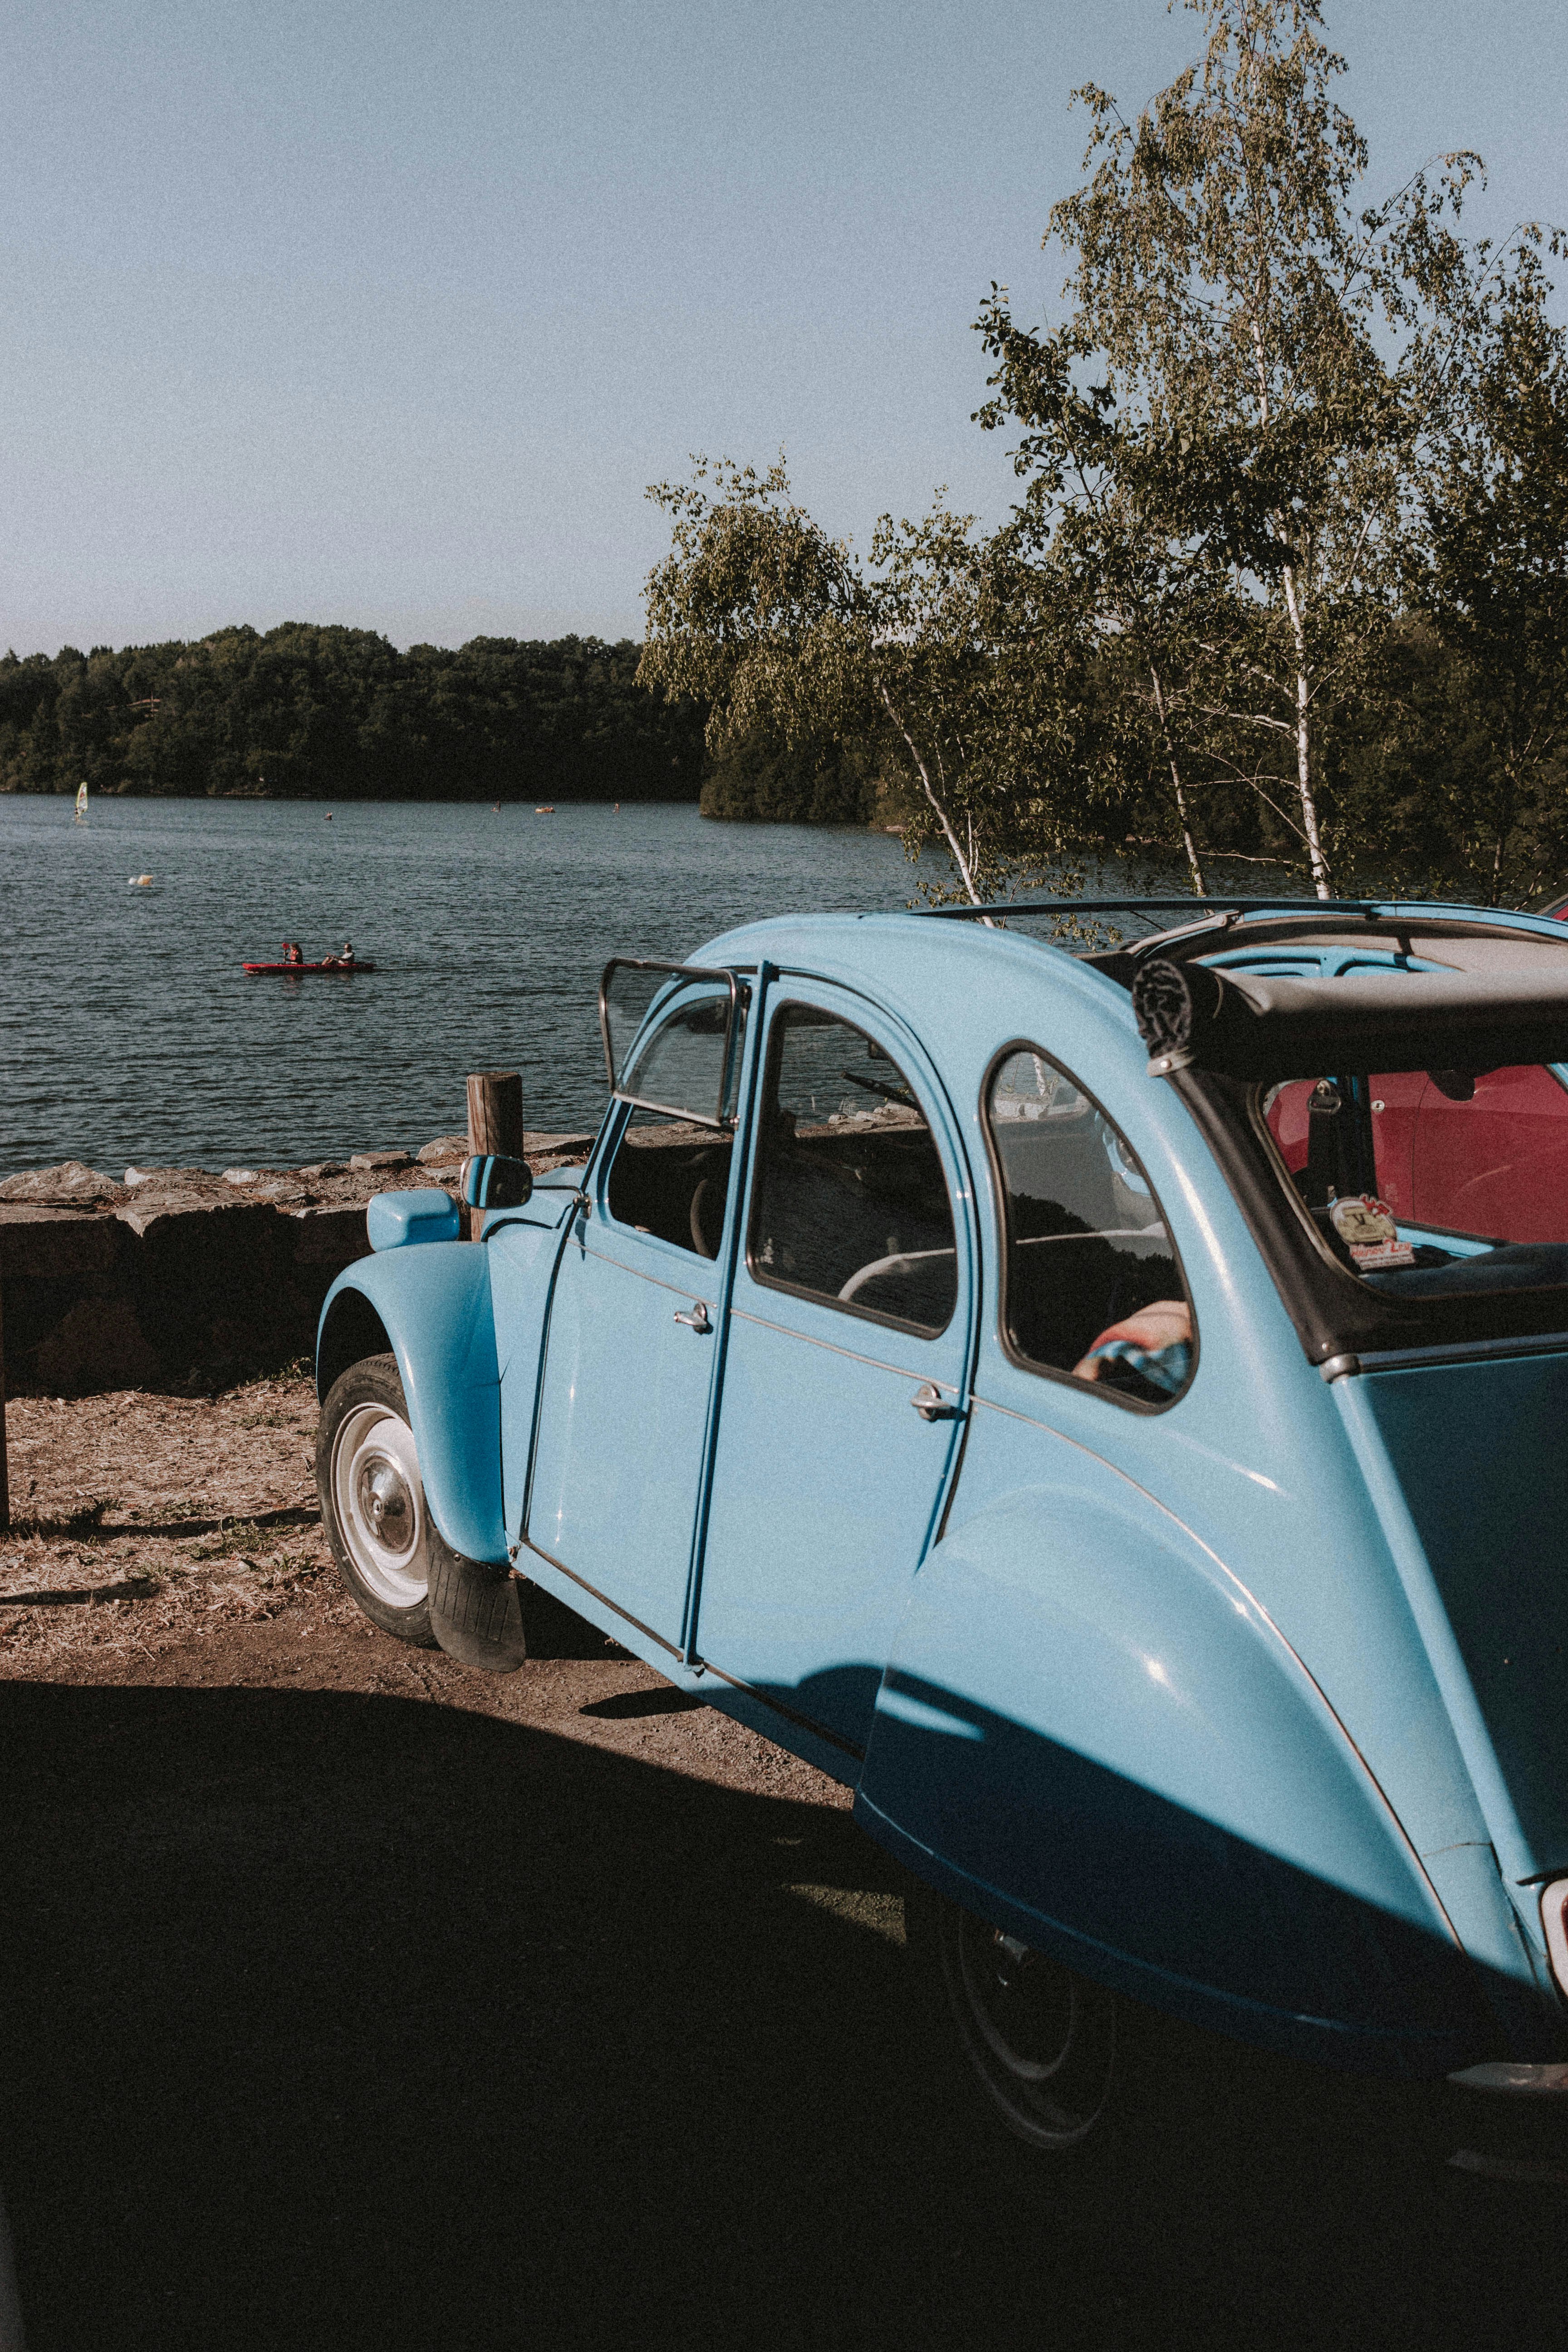 blue and white vintage car parked beside body of water during daytime